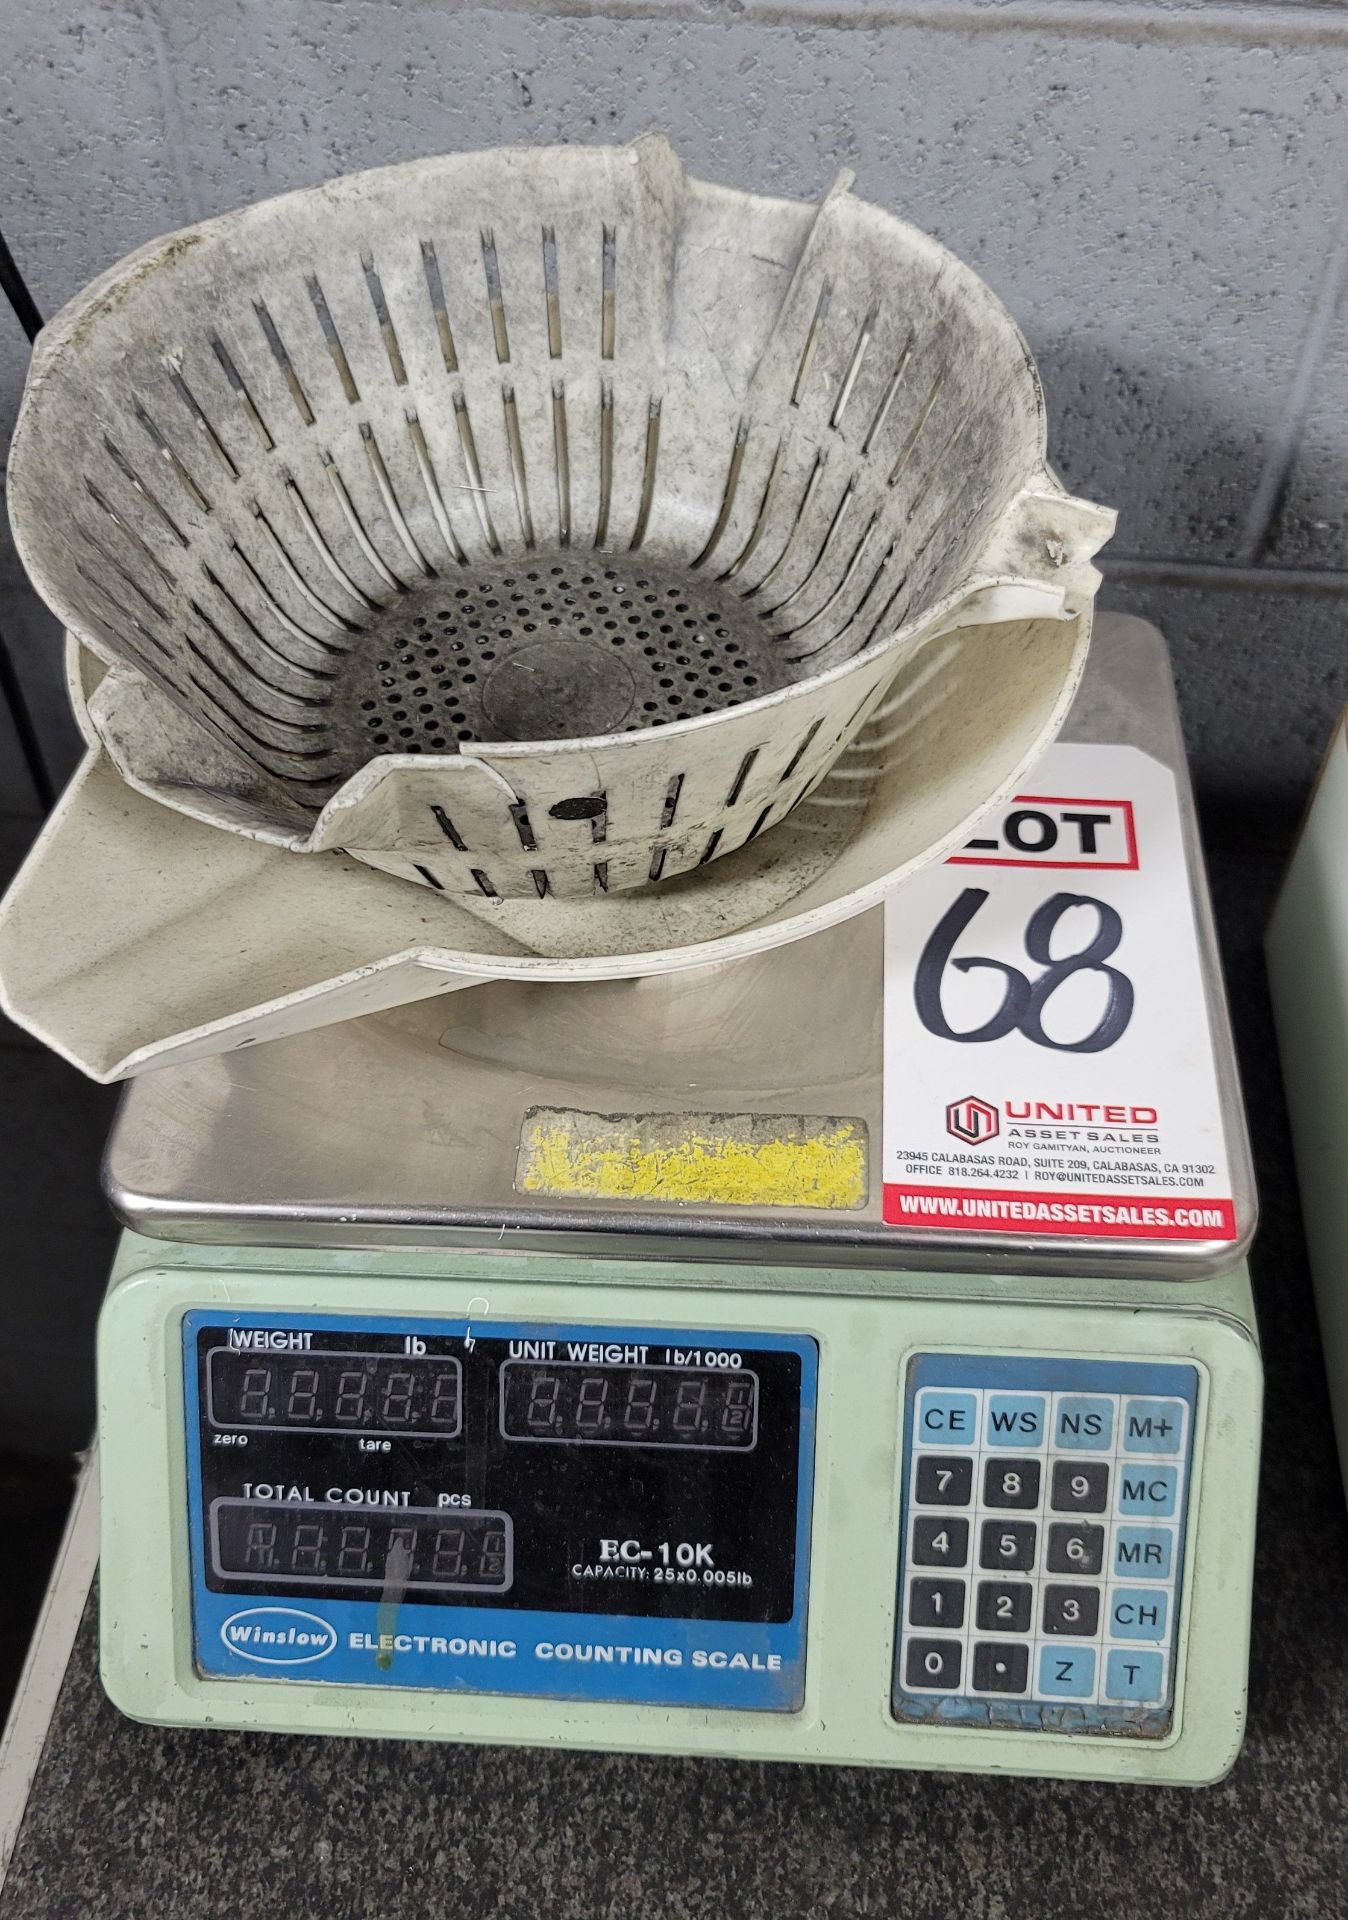 WINSLOW ELECTRONIC COUNTING SCALE, MODEL ED-10K, (LOCATION: 2174 W 2300 S)